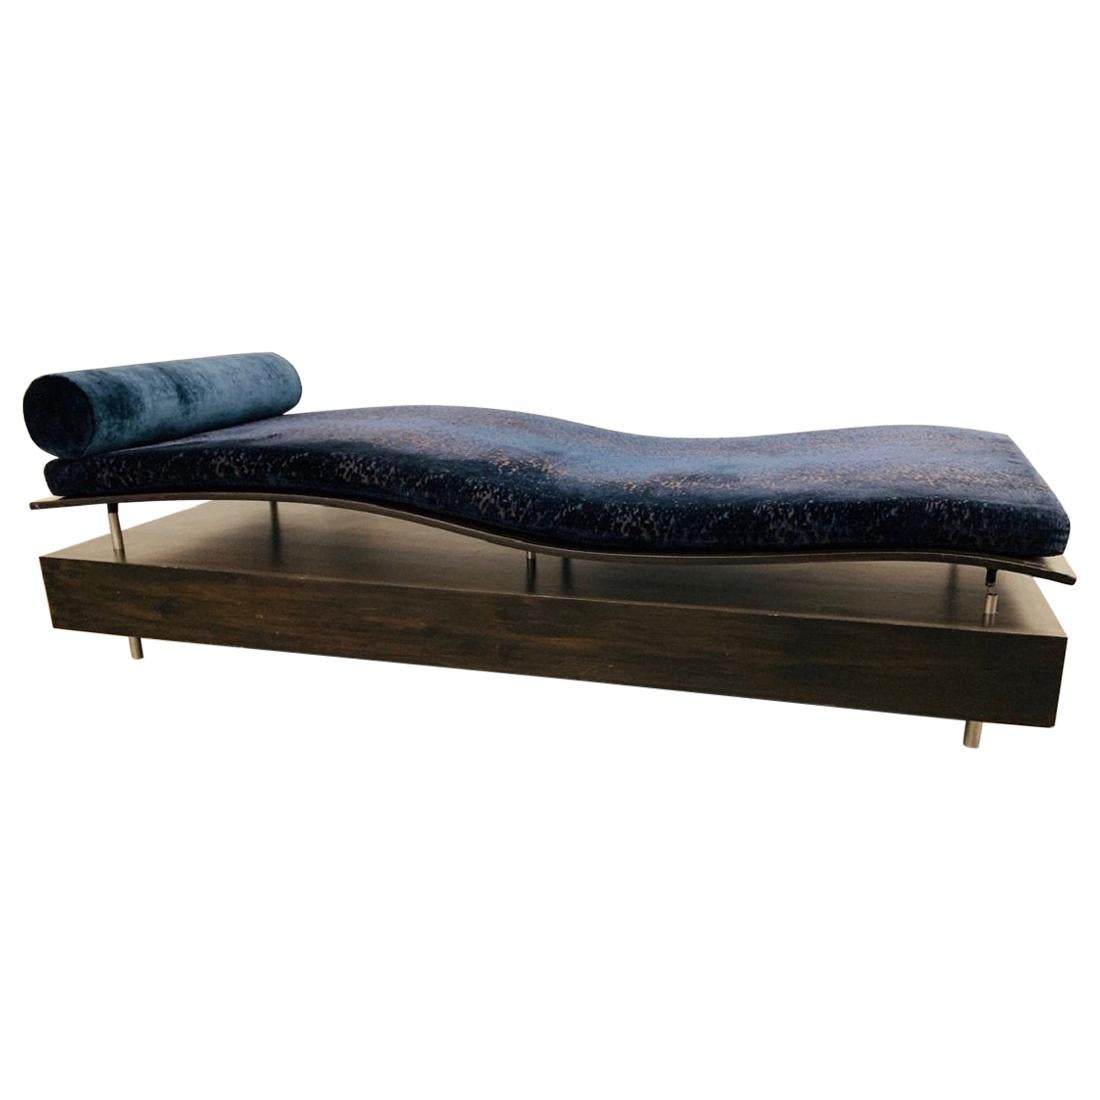 Longitude Chaise Lounge by Maya Lin for Knoll